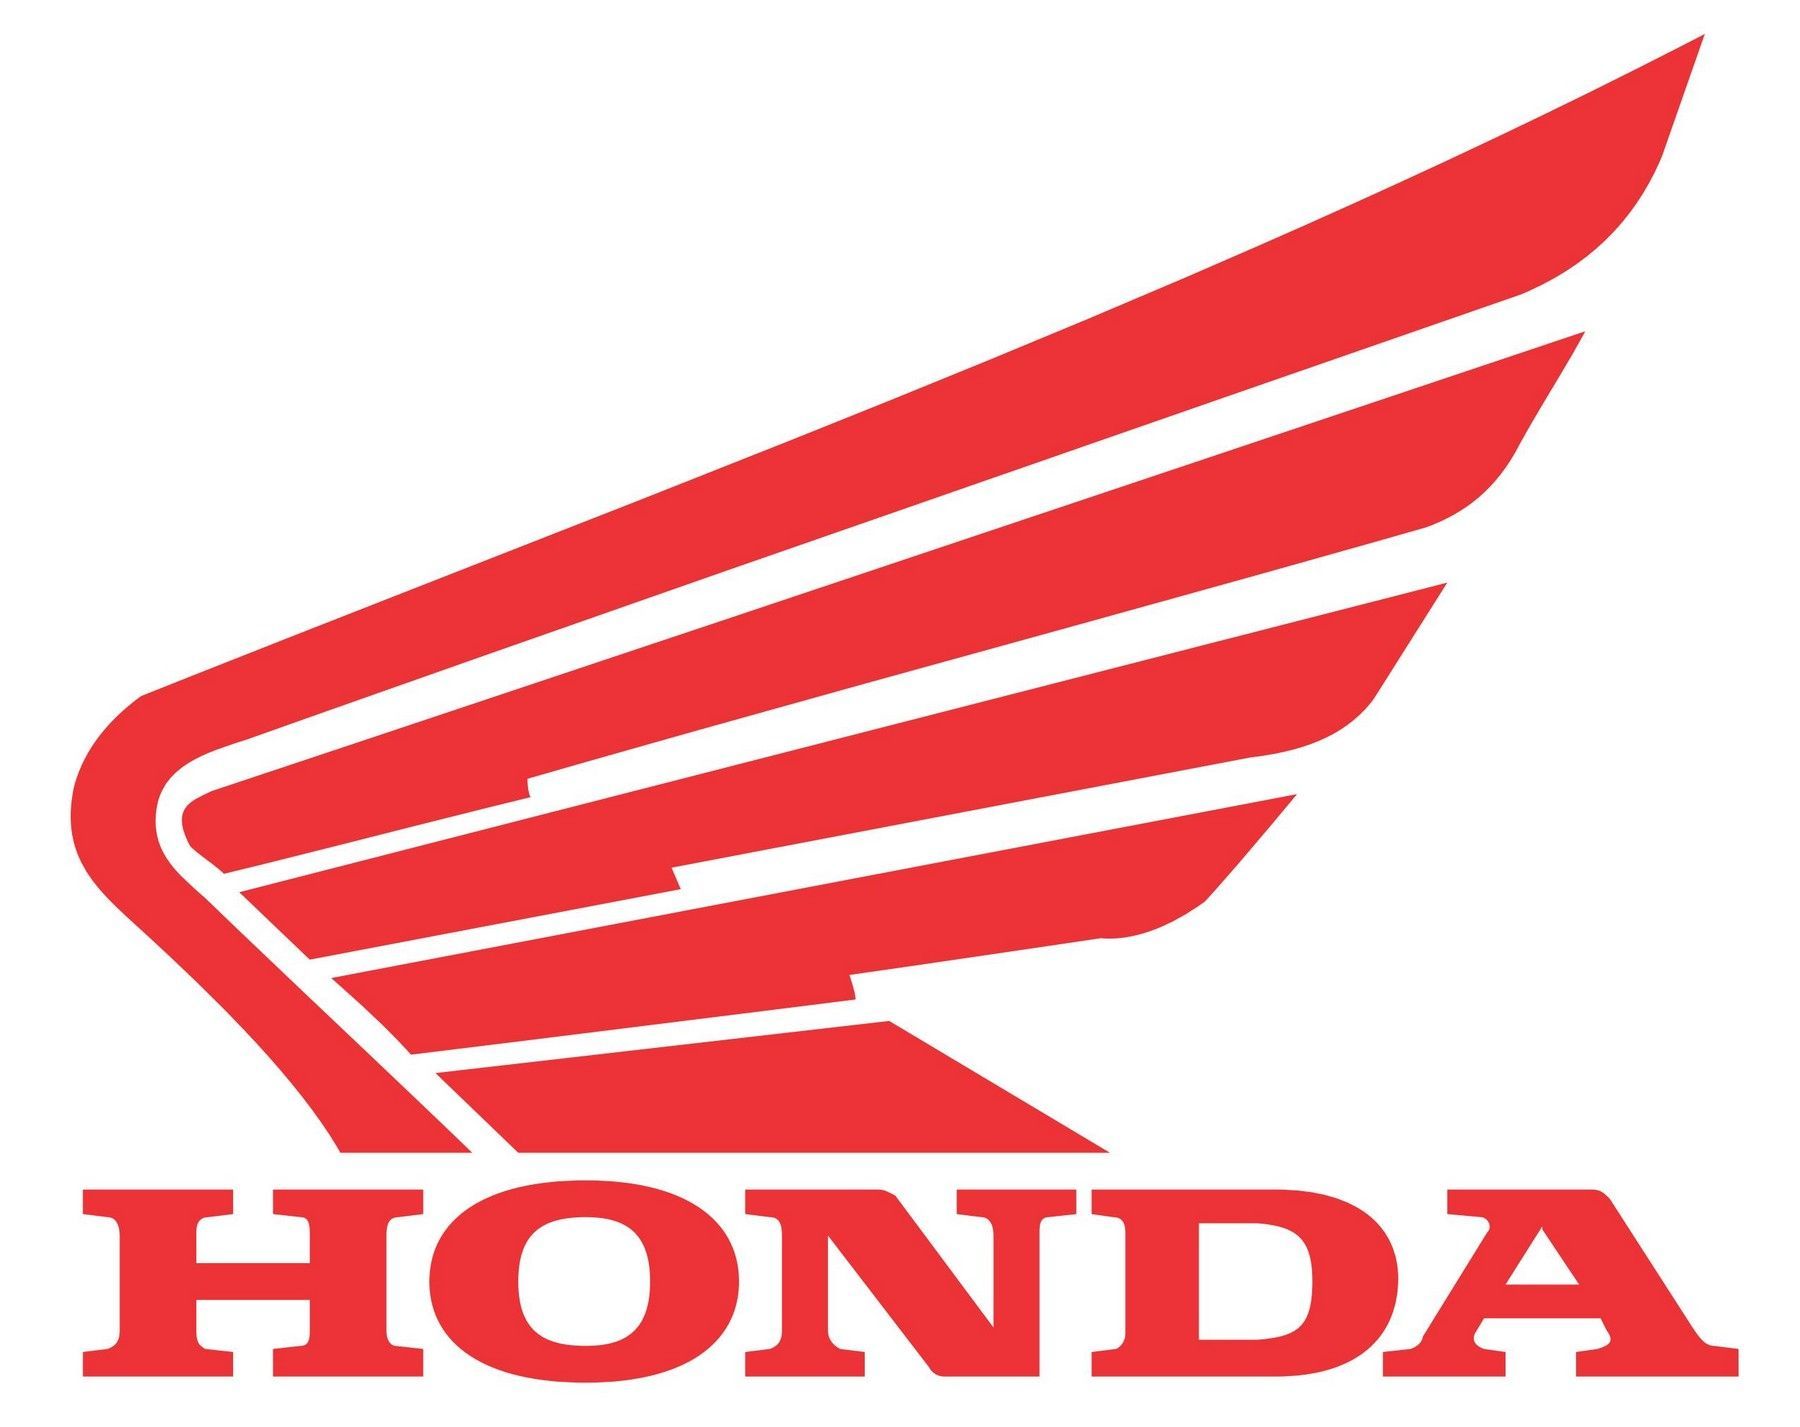 The official Honda icon: &quot;Honda&quot; in red letters under a red wing design with white background.